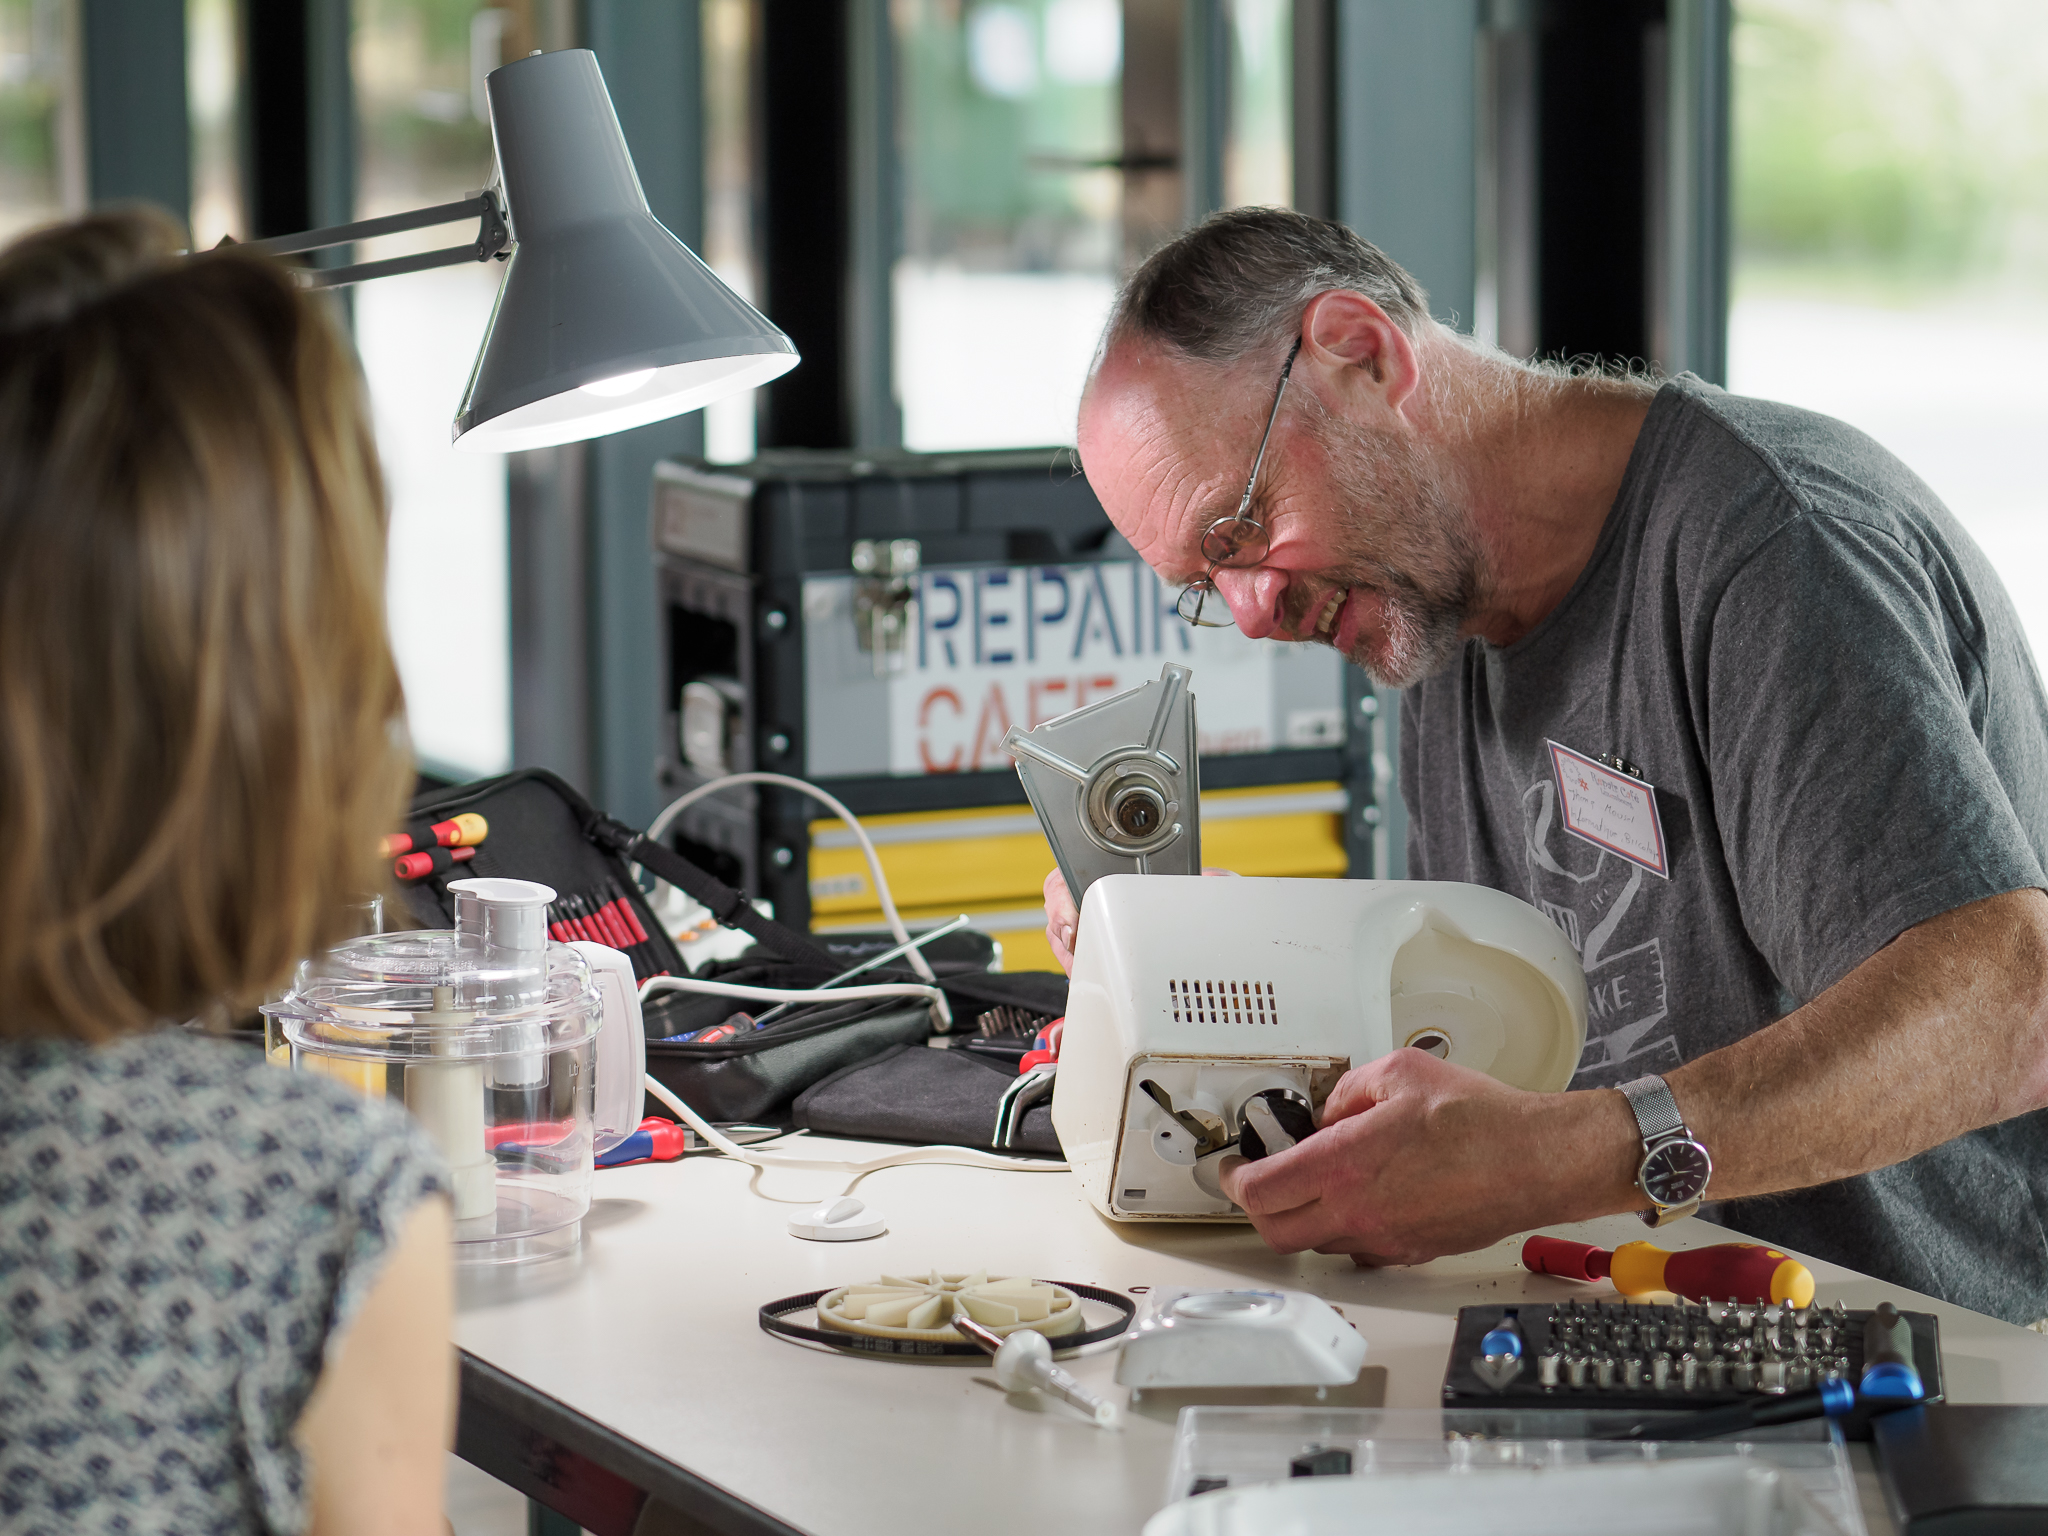 Commune & groupe local, CELL, Repair Cafe Lëtzebuerg